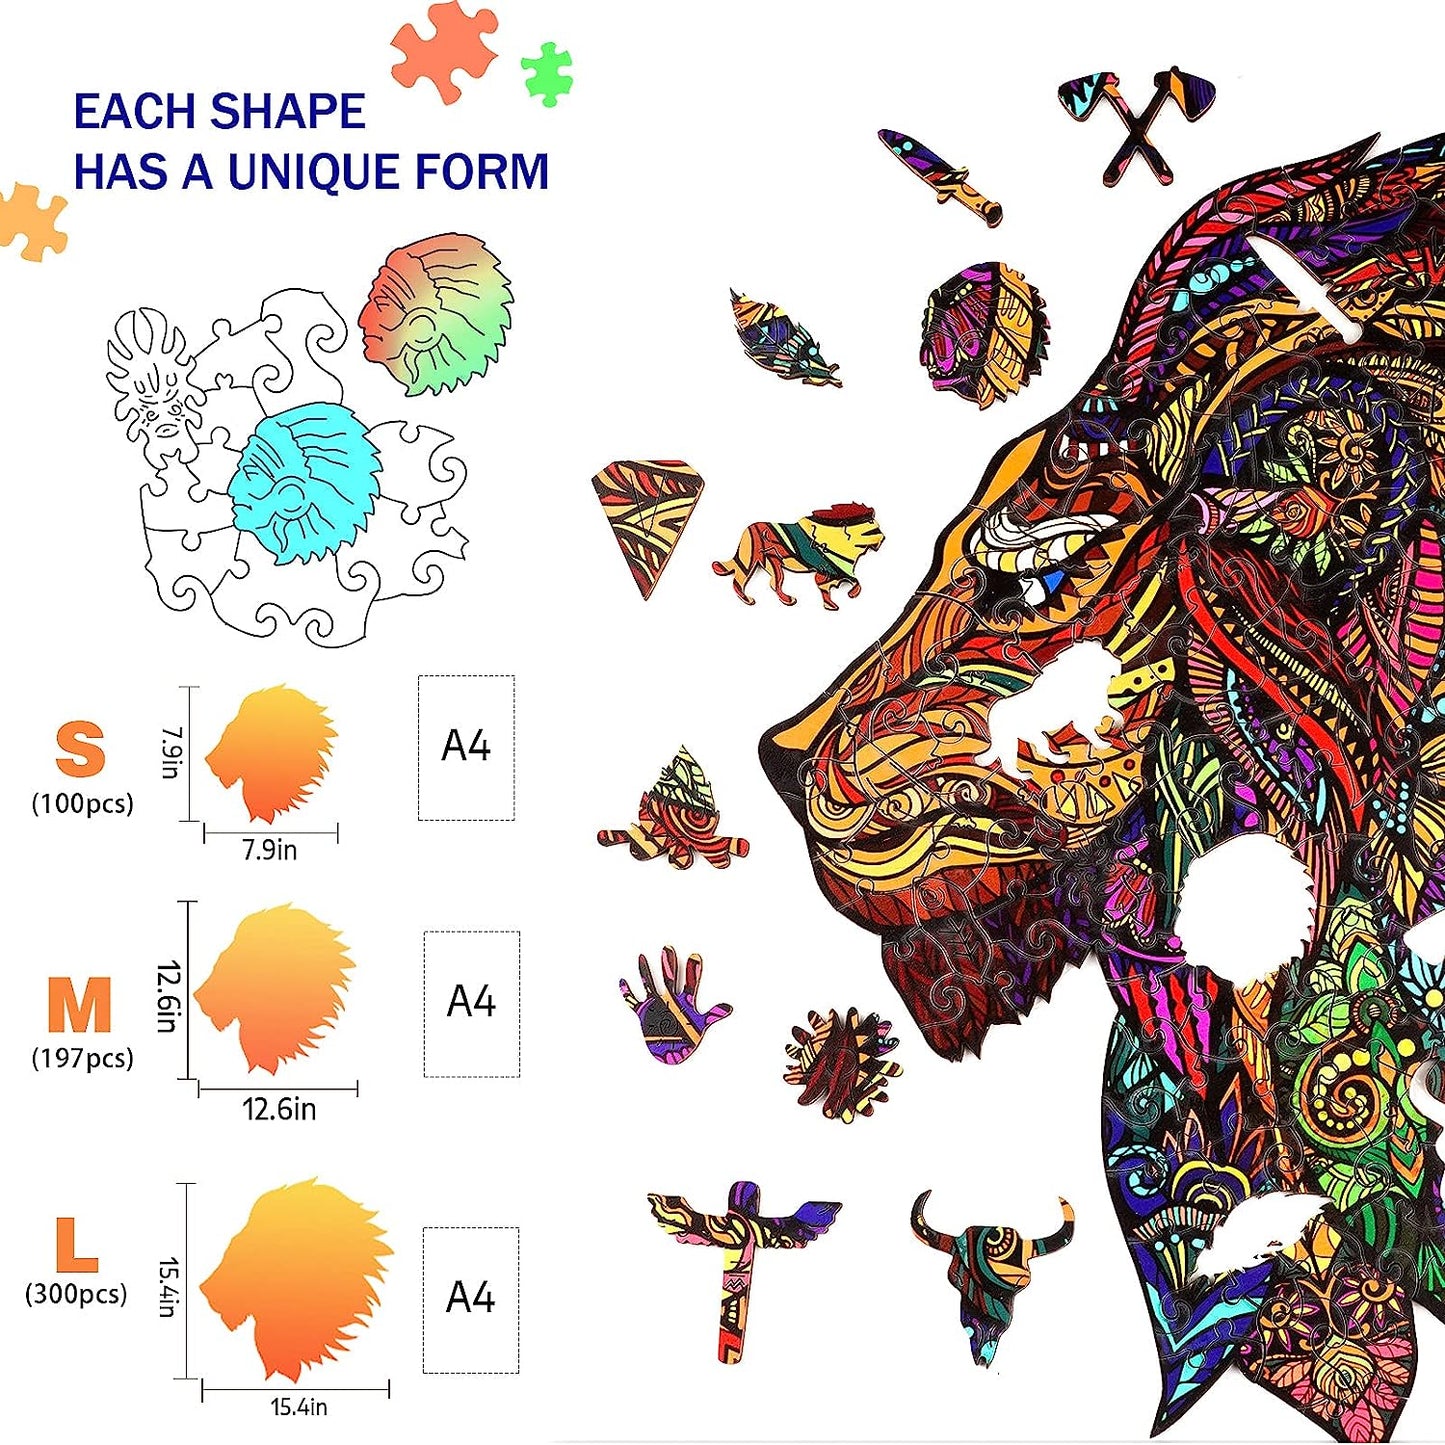 Wooden Jigsaw Puzzles- Lion King Puzzle Unique Shape Animal Wooden Puzzle, Best Gift for Adults and Kids, Family Game Play Collection